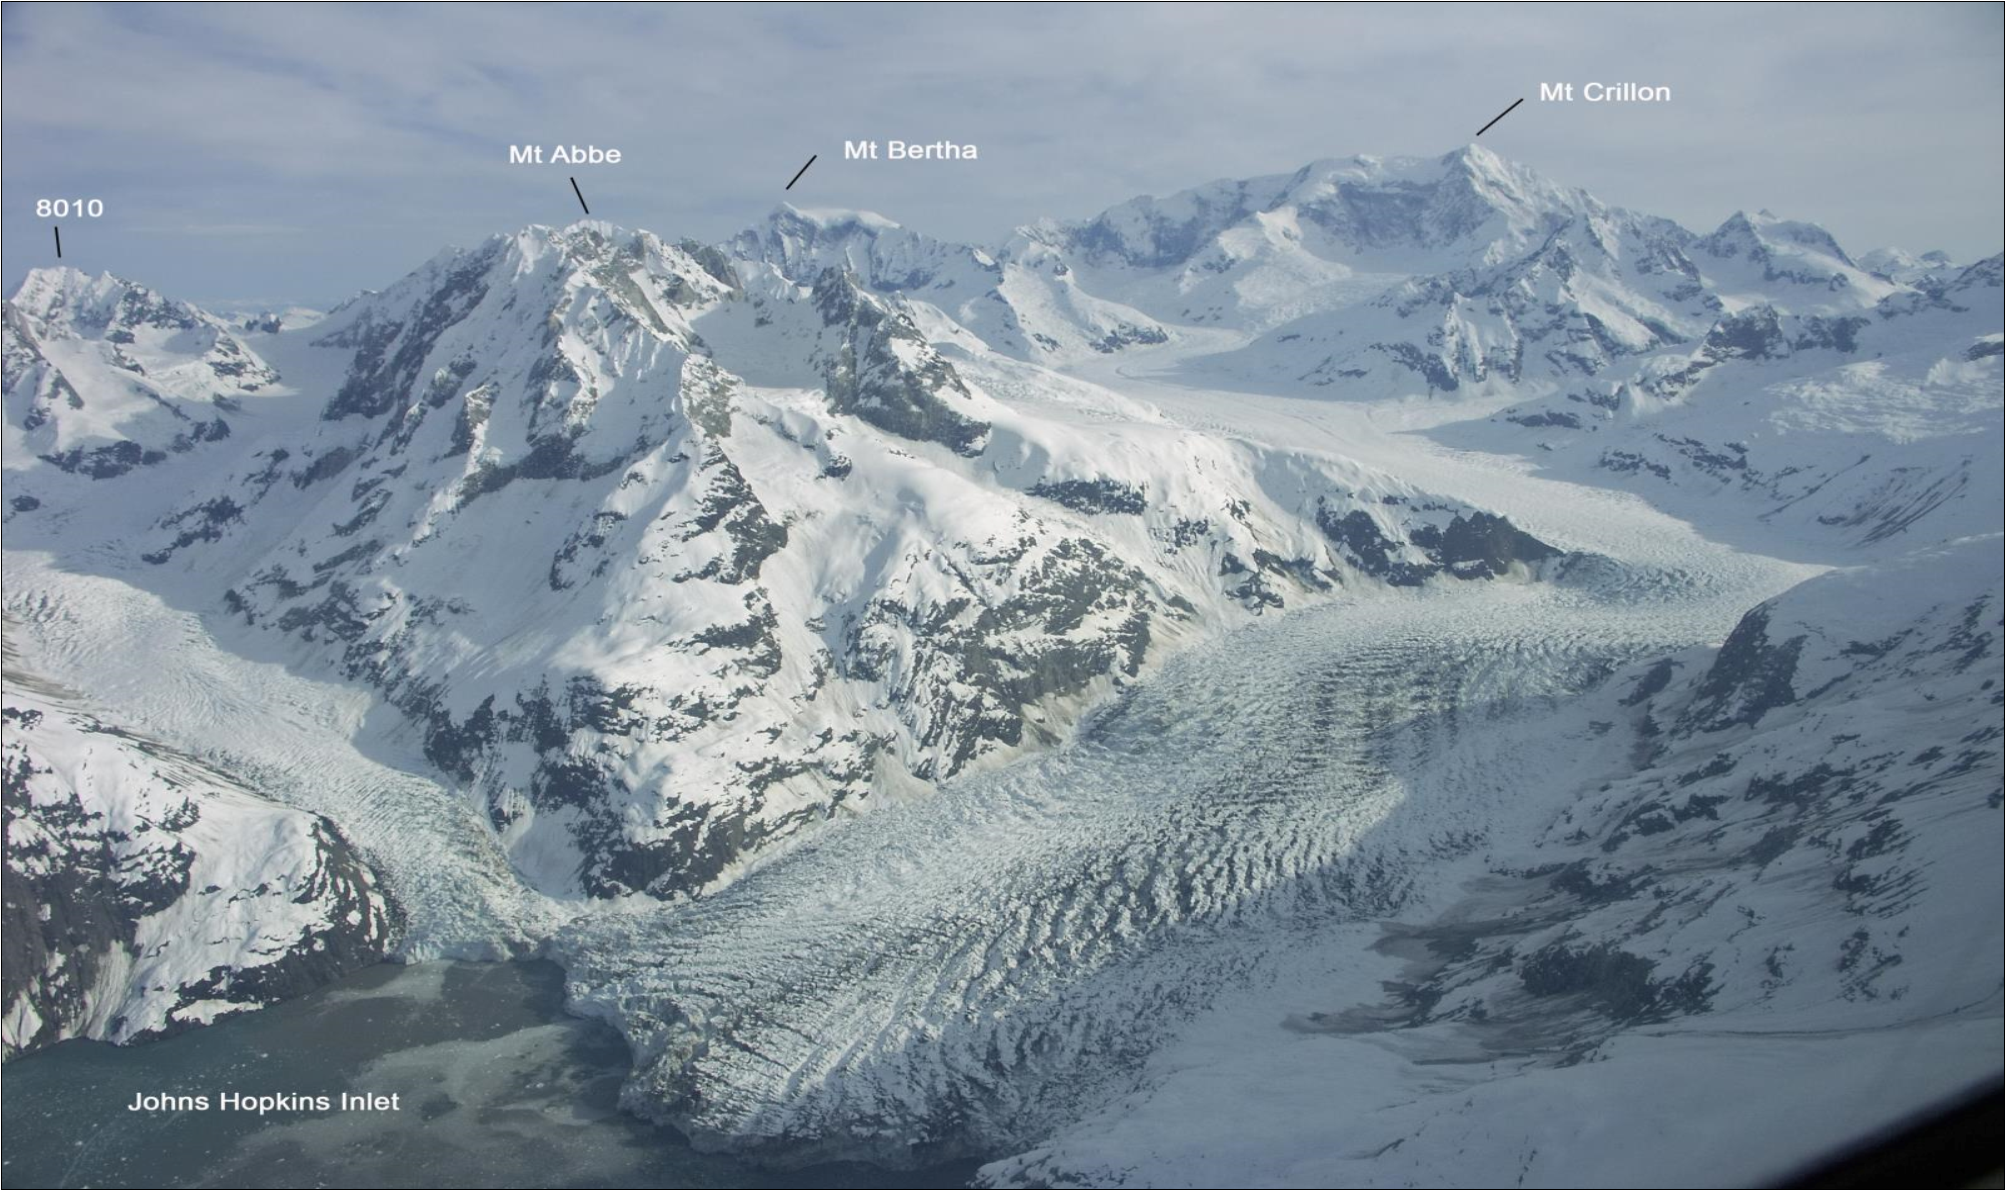 Four distinct mountain peaks labeled with a glacier in the foreground